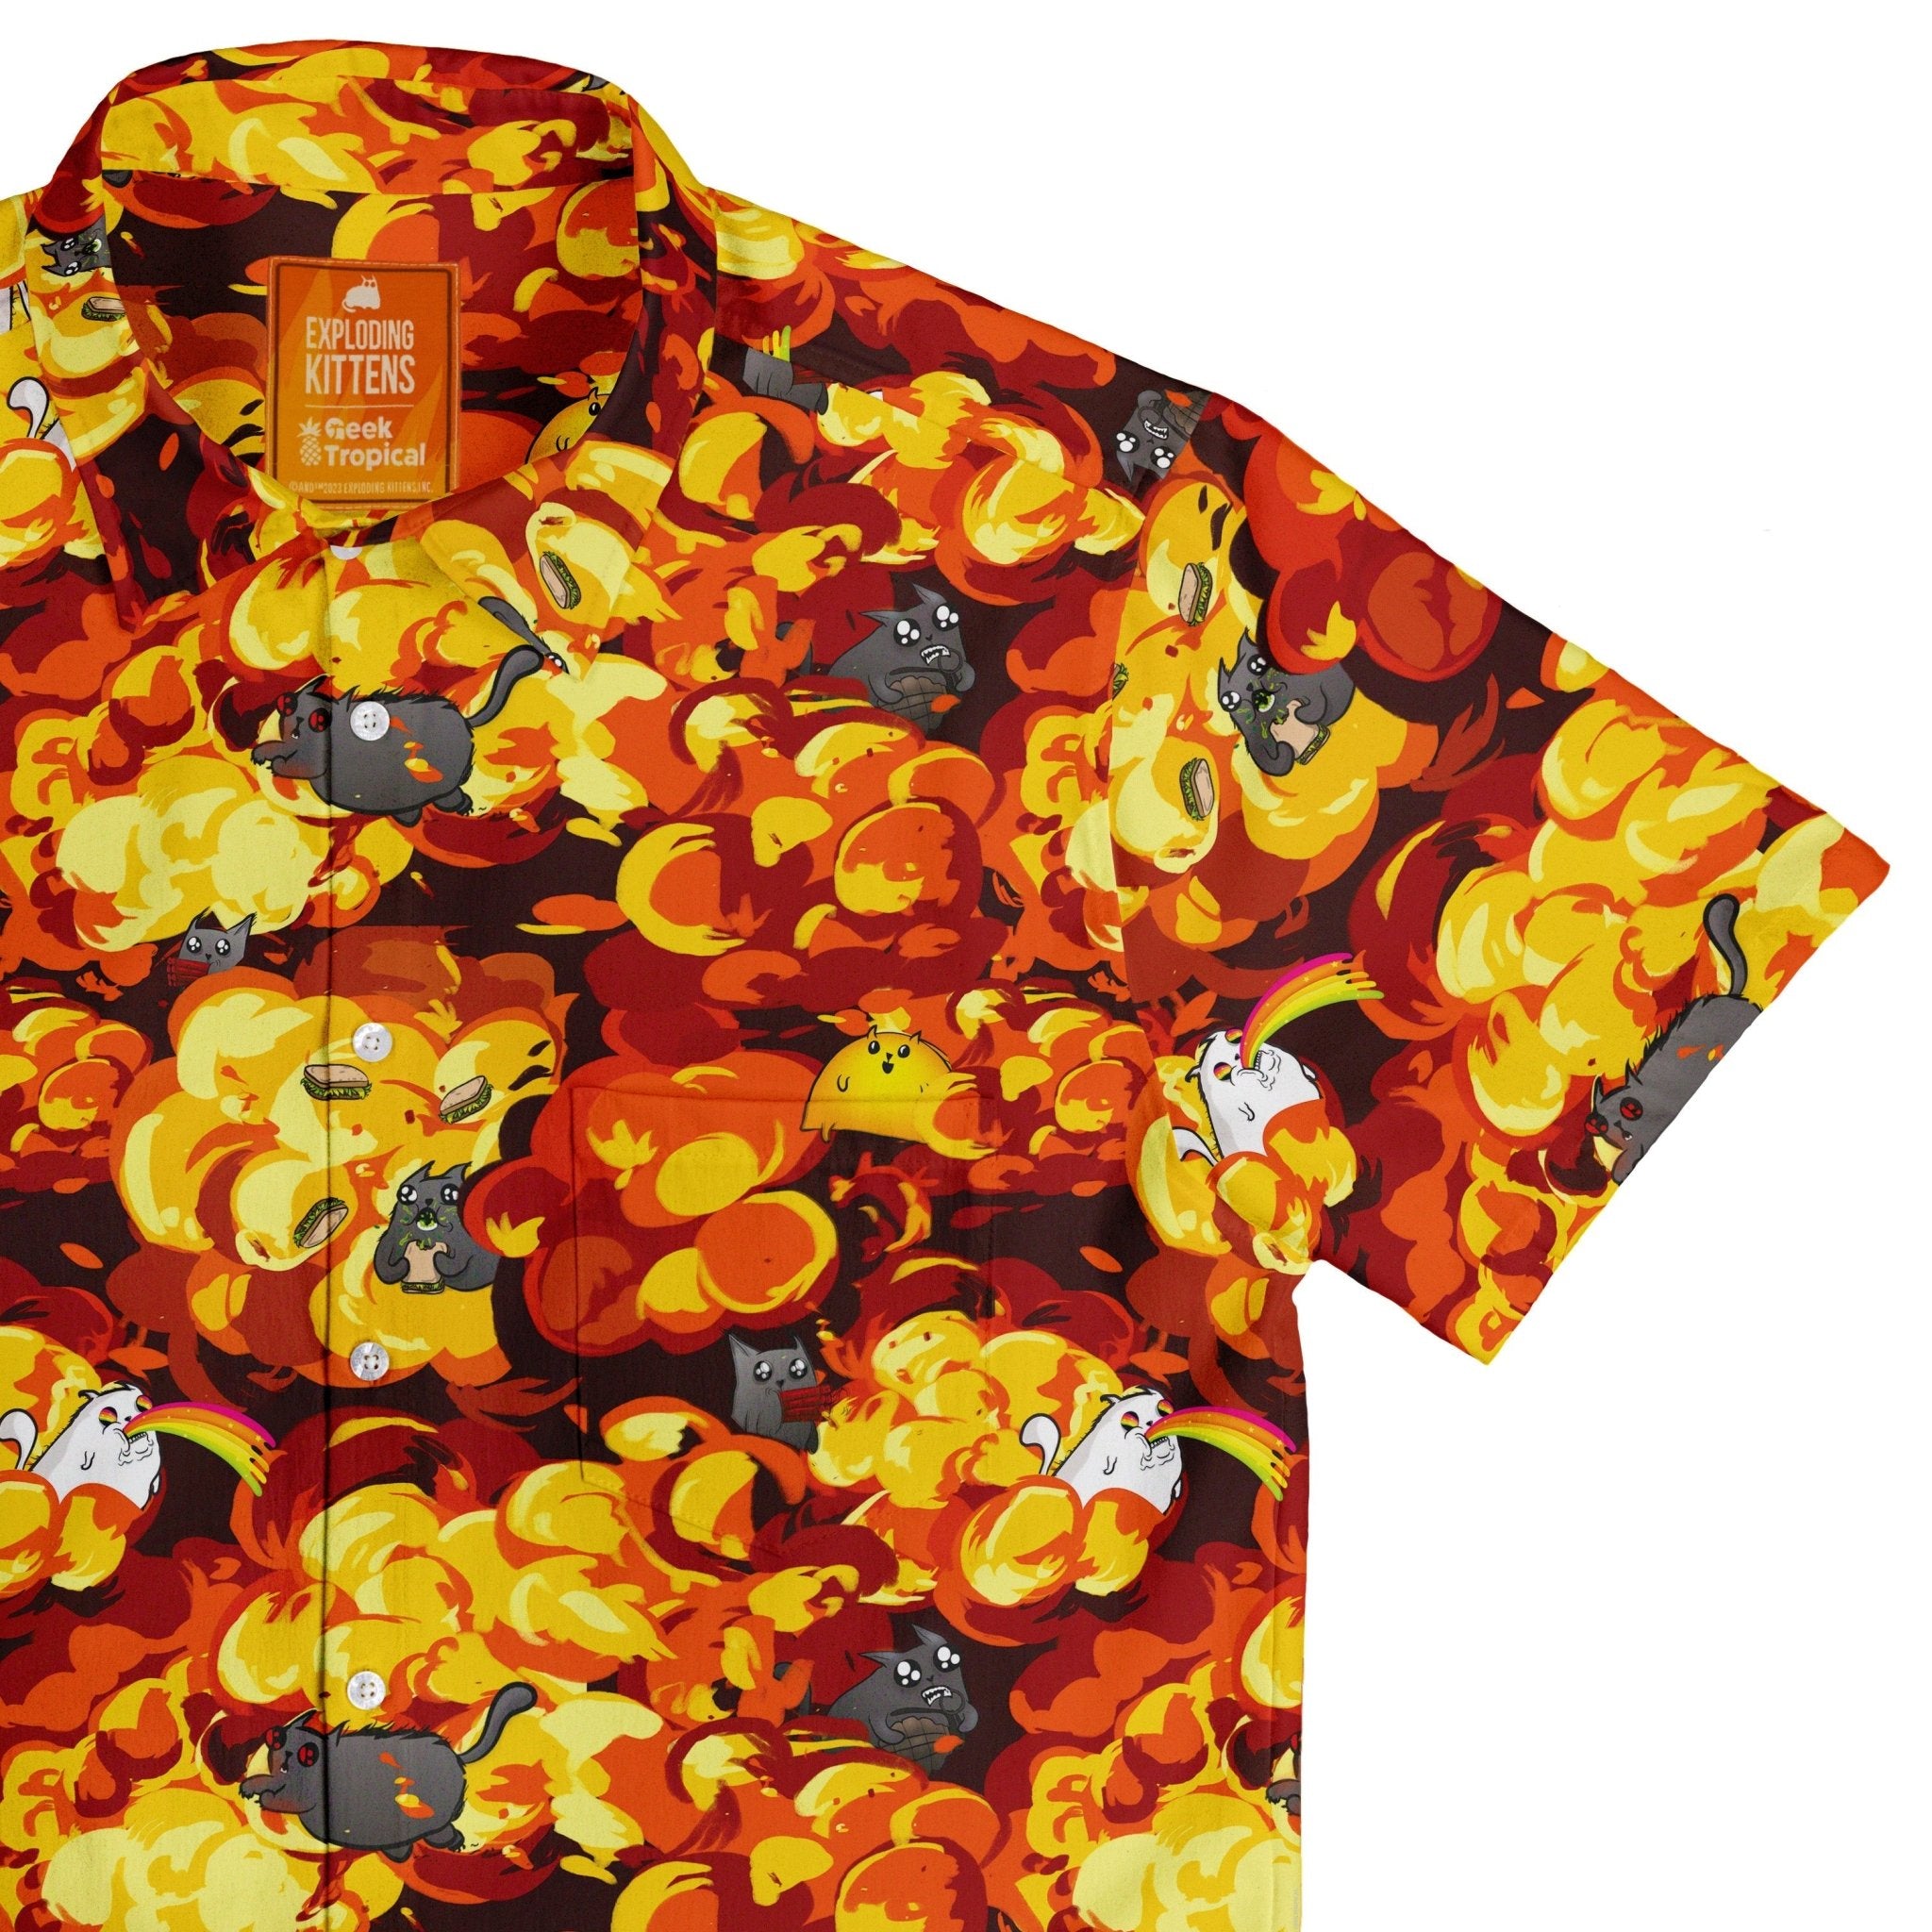 Chaotic Exploding Kittens Button Up Shirt - adult sizing - Animal Patterns - board game print